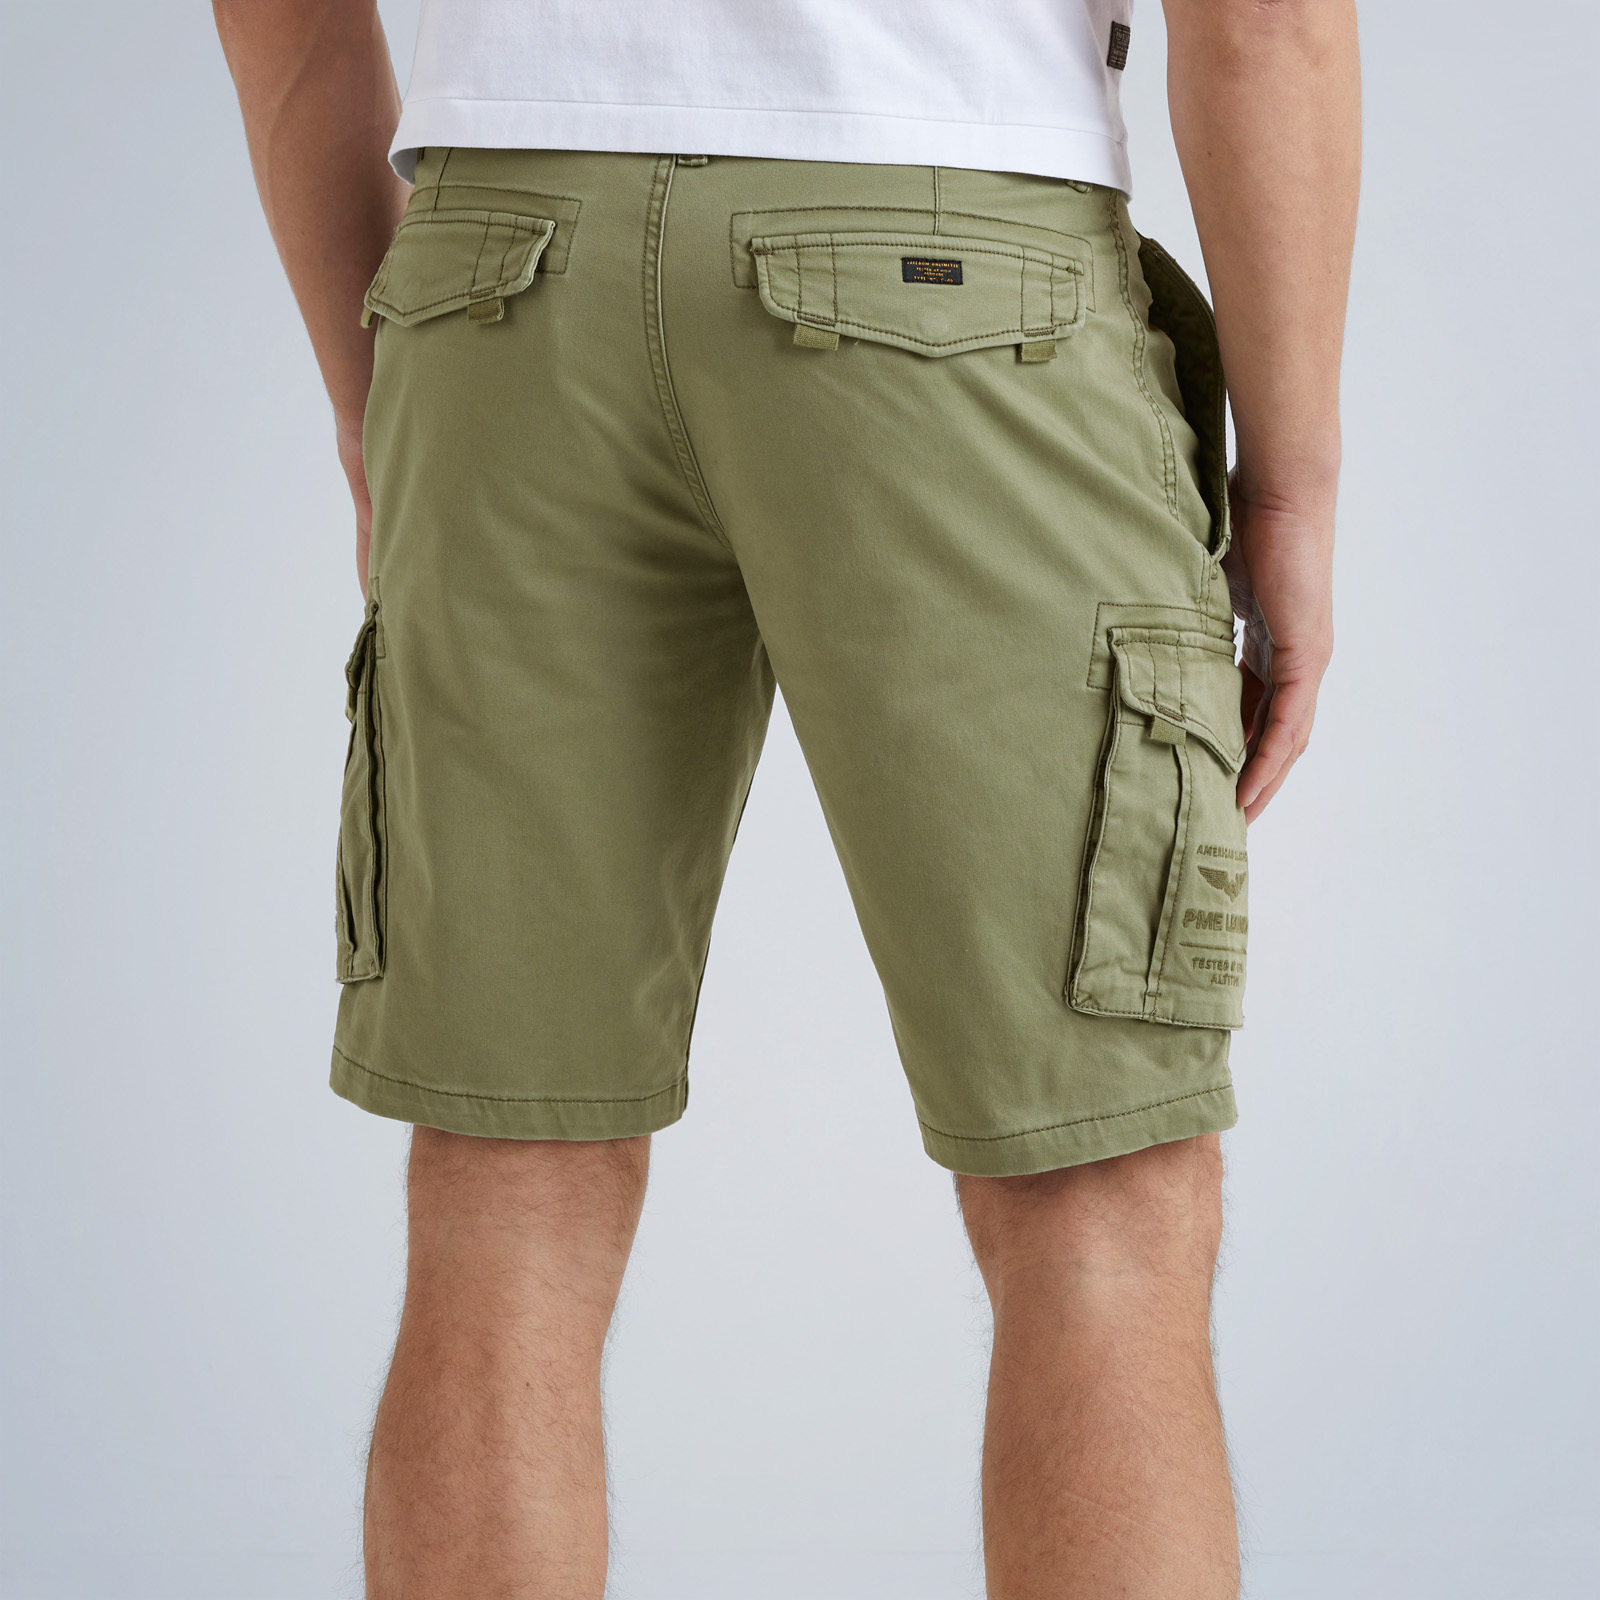 LEGEND Short shipping Cargo returns and PME Stretch Twill | Free |